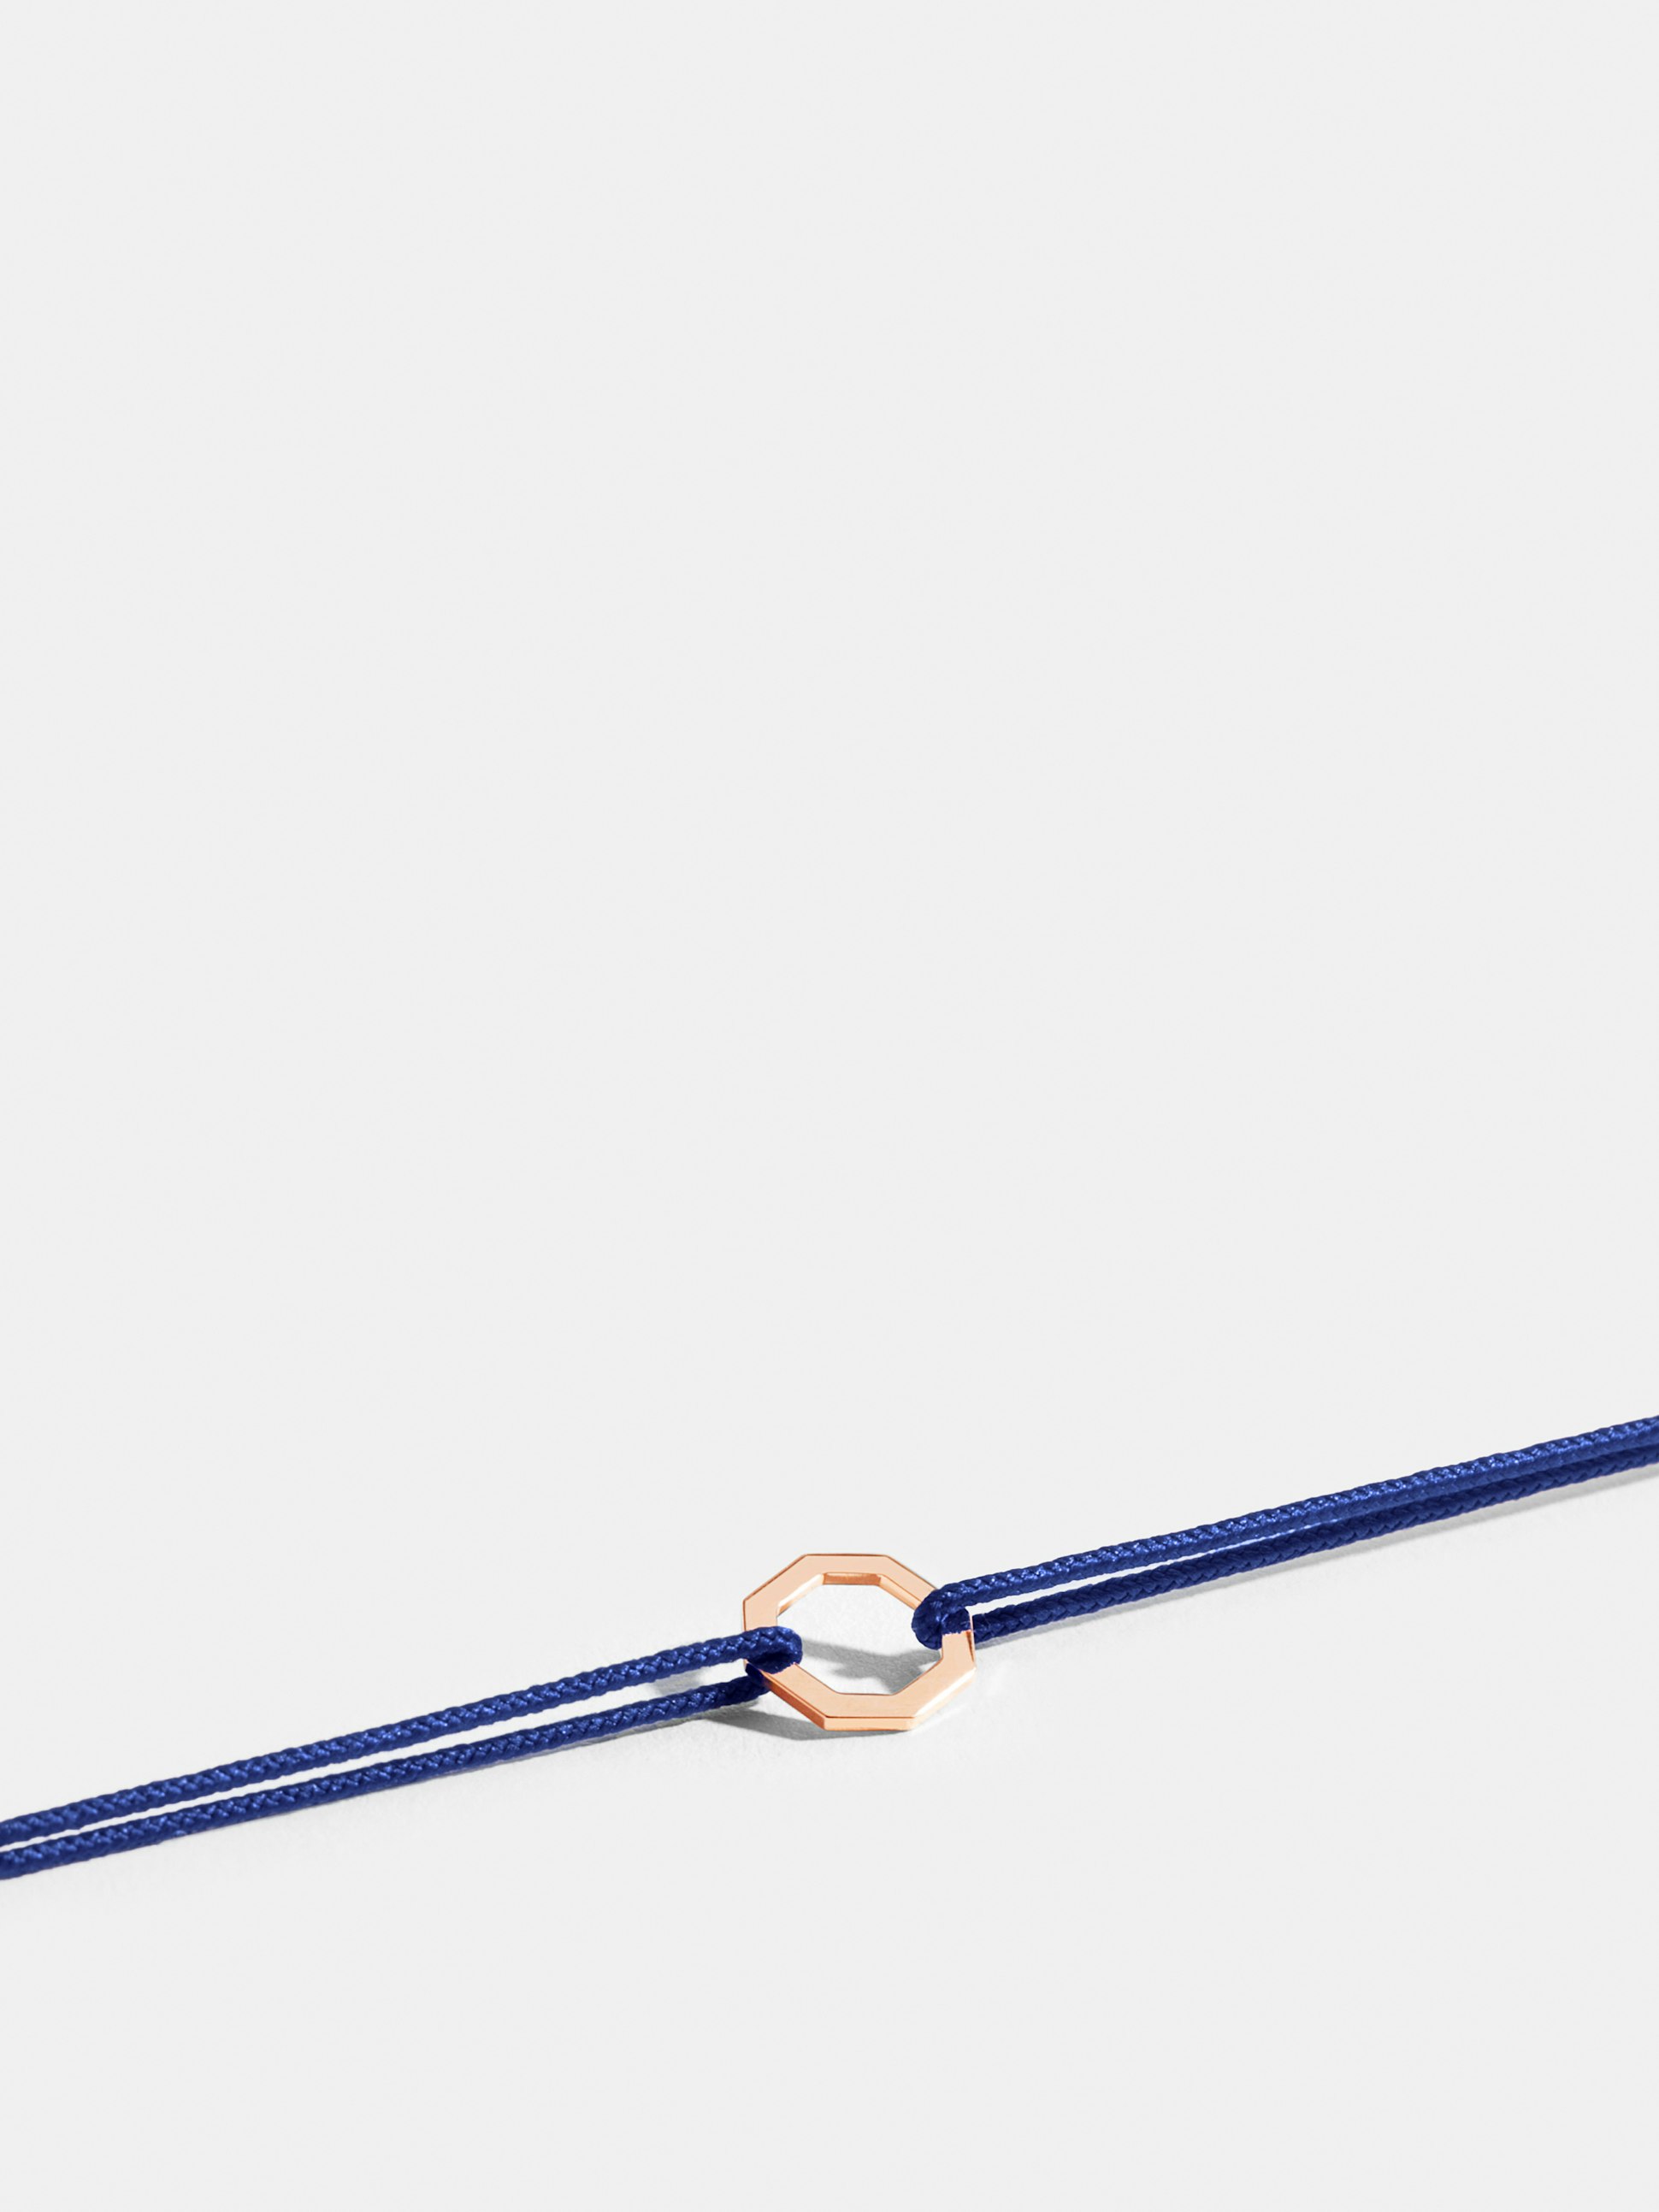 Octogone motif in 18k Fairmined ethical rose gold, on a klein blue cord. 